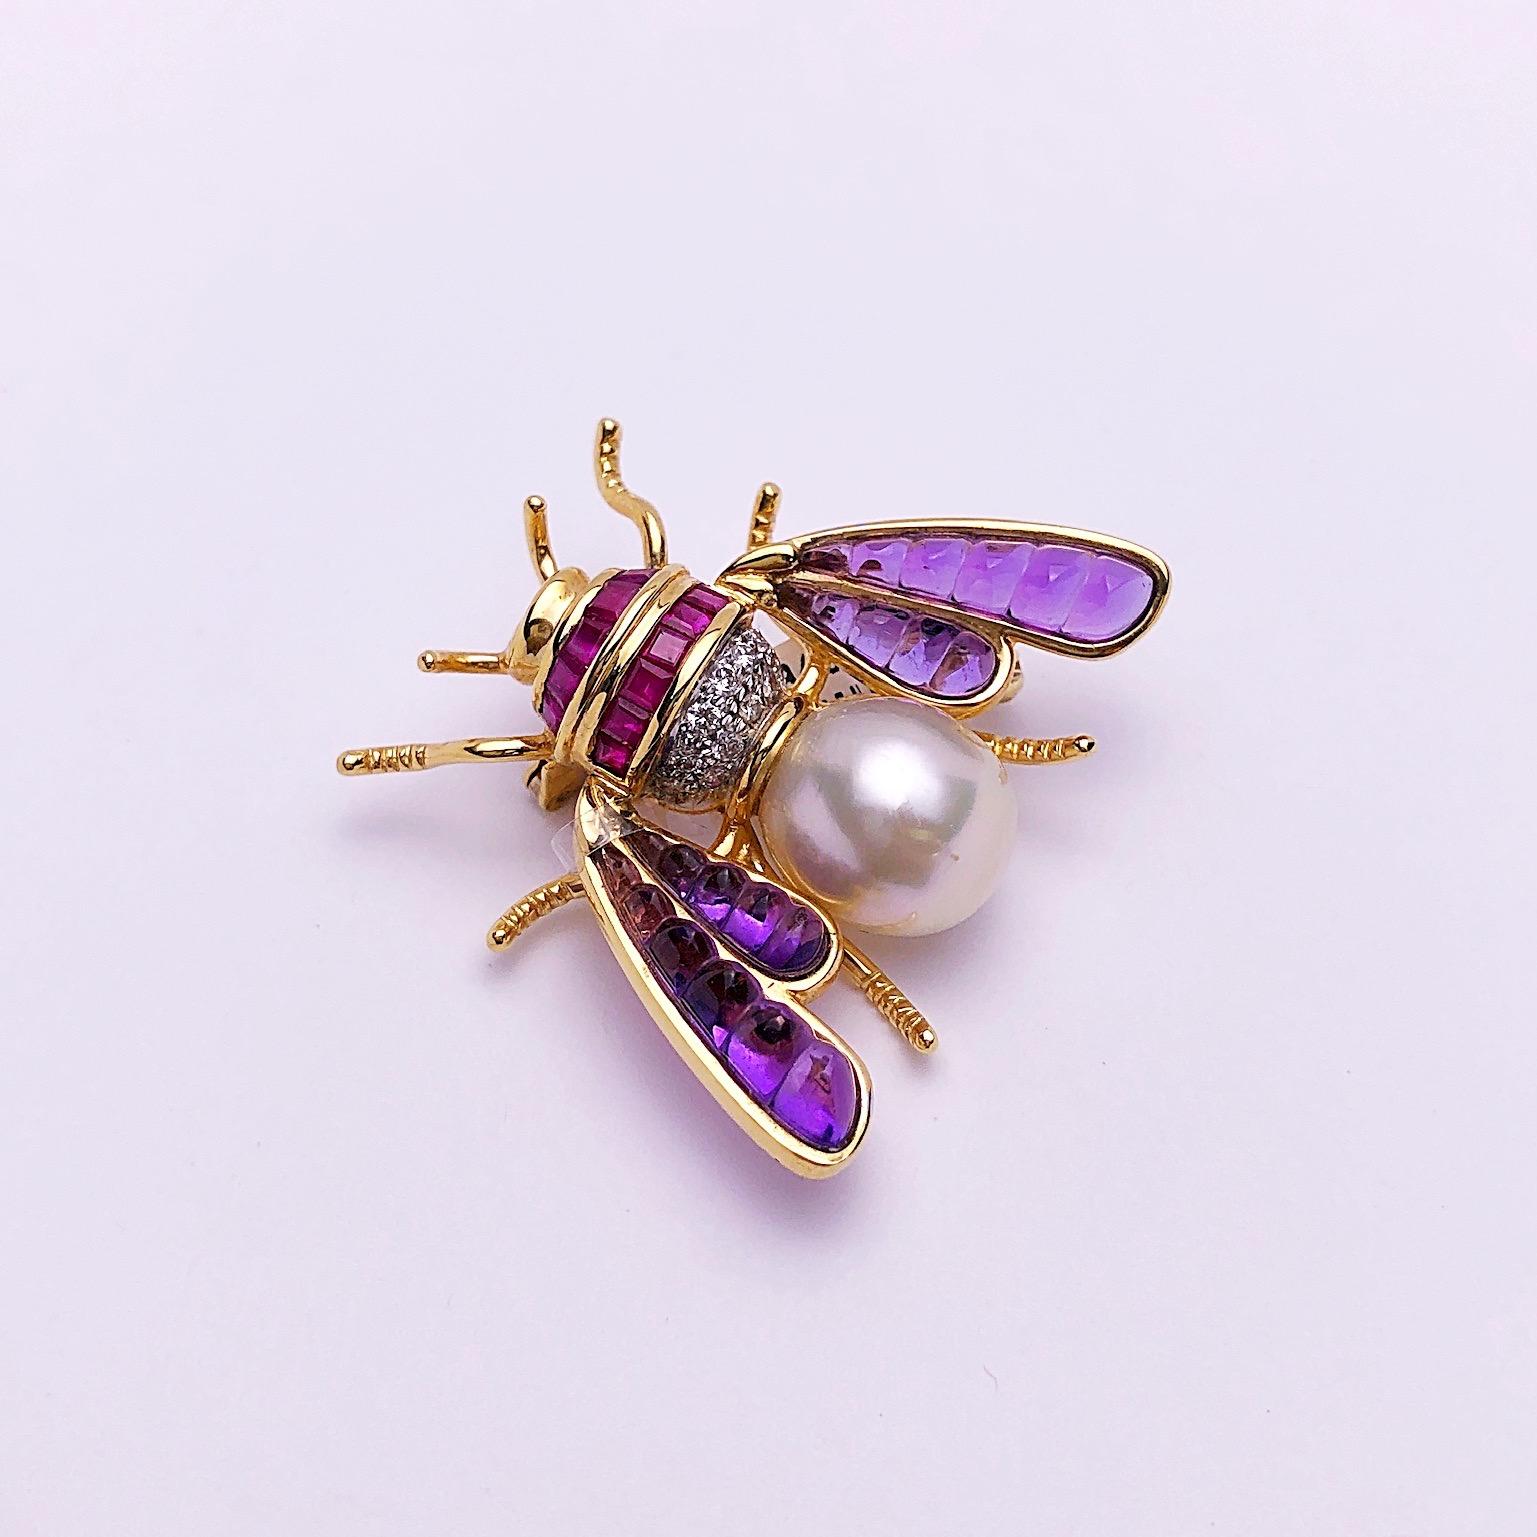 Retro 18 Karat Yellow Gold Bee Brooch with Ruby, Diamond, Amethyst and South Sea Pearl